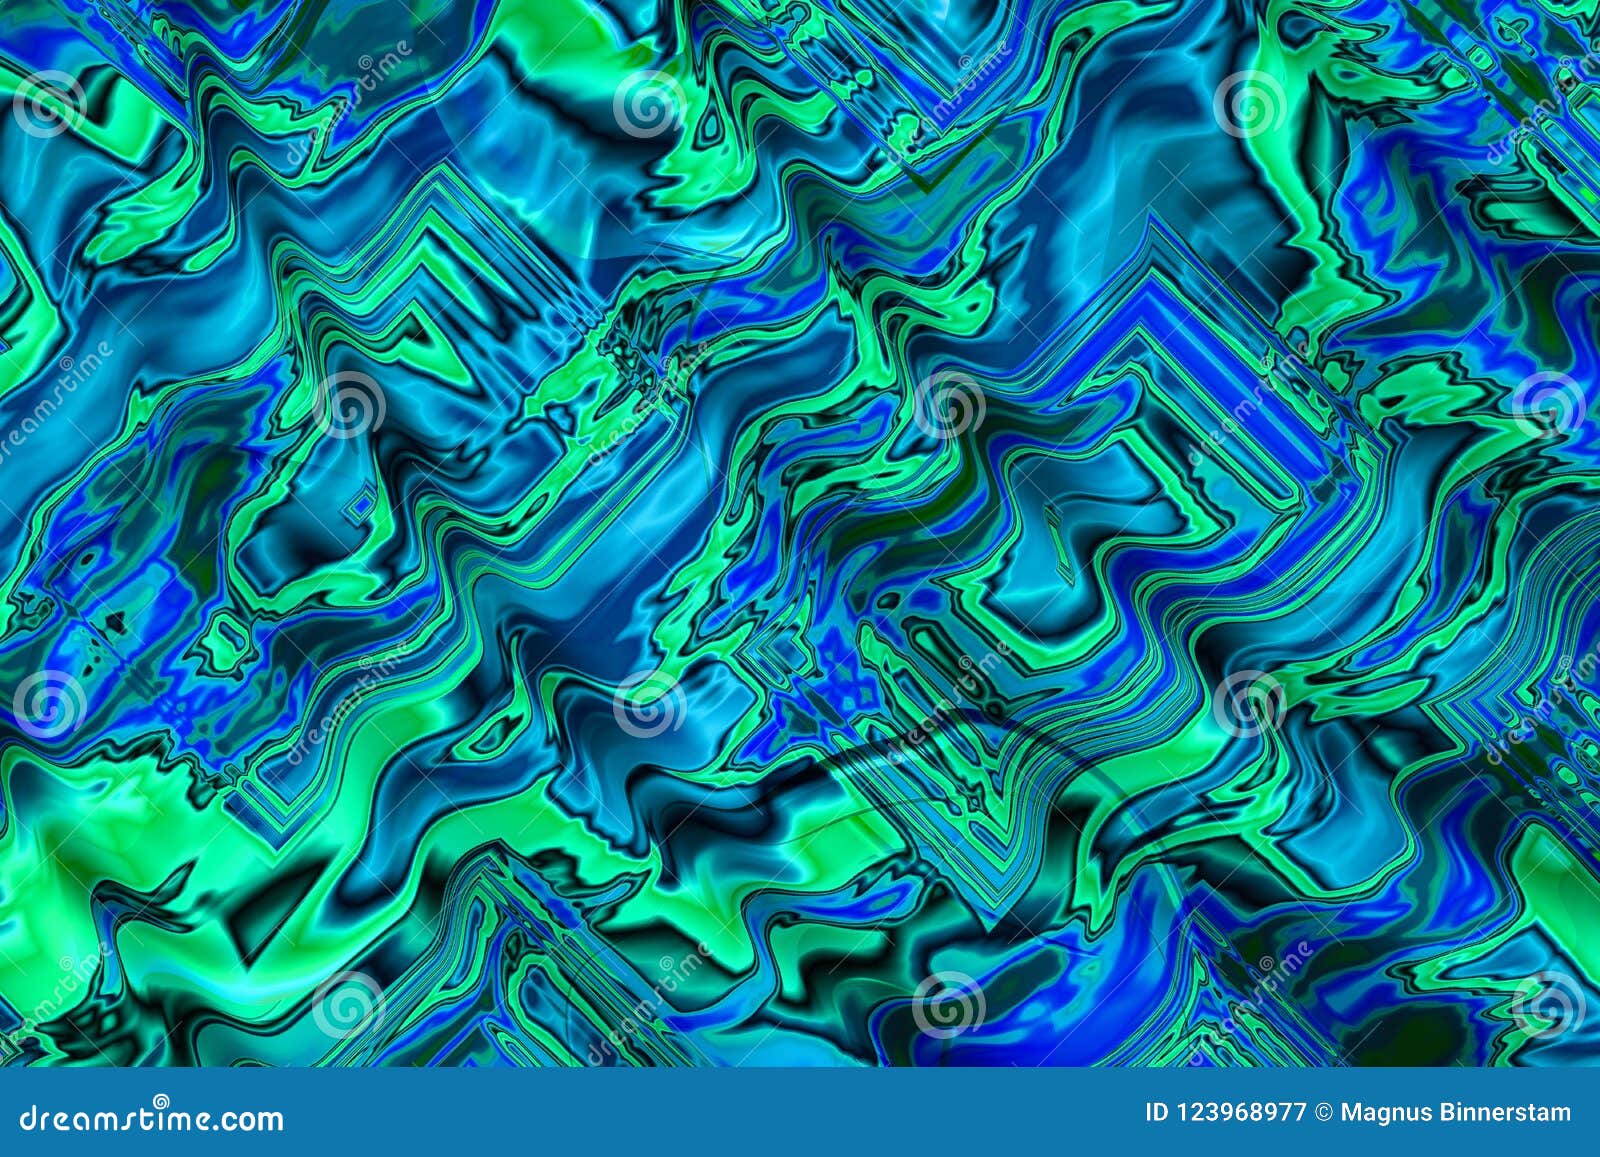 Psychedelic and Bright Abstract Background Texture Stock ...